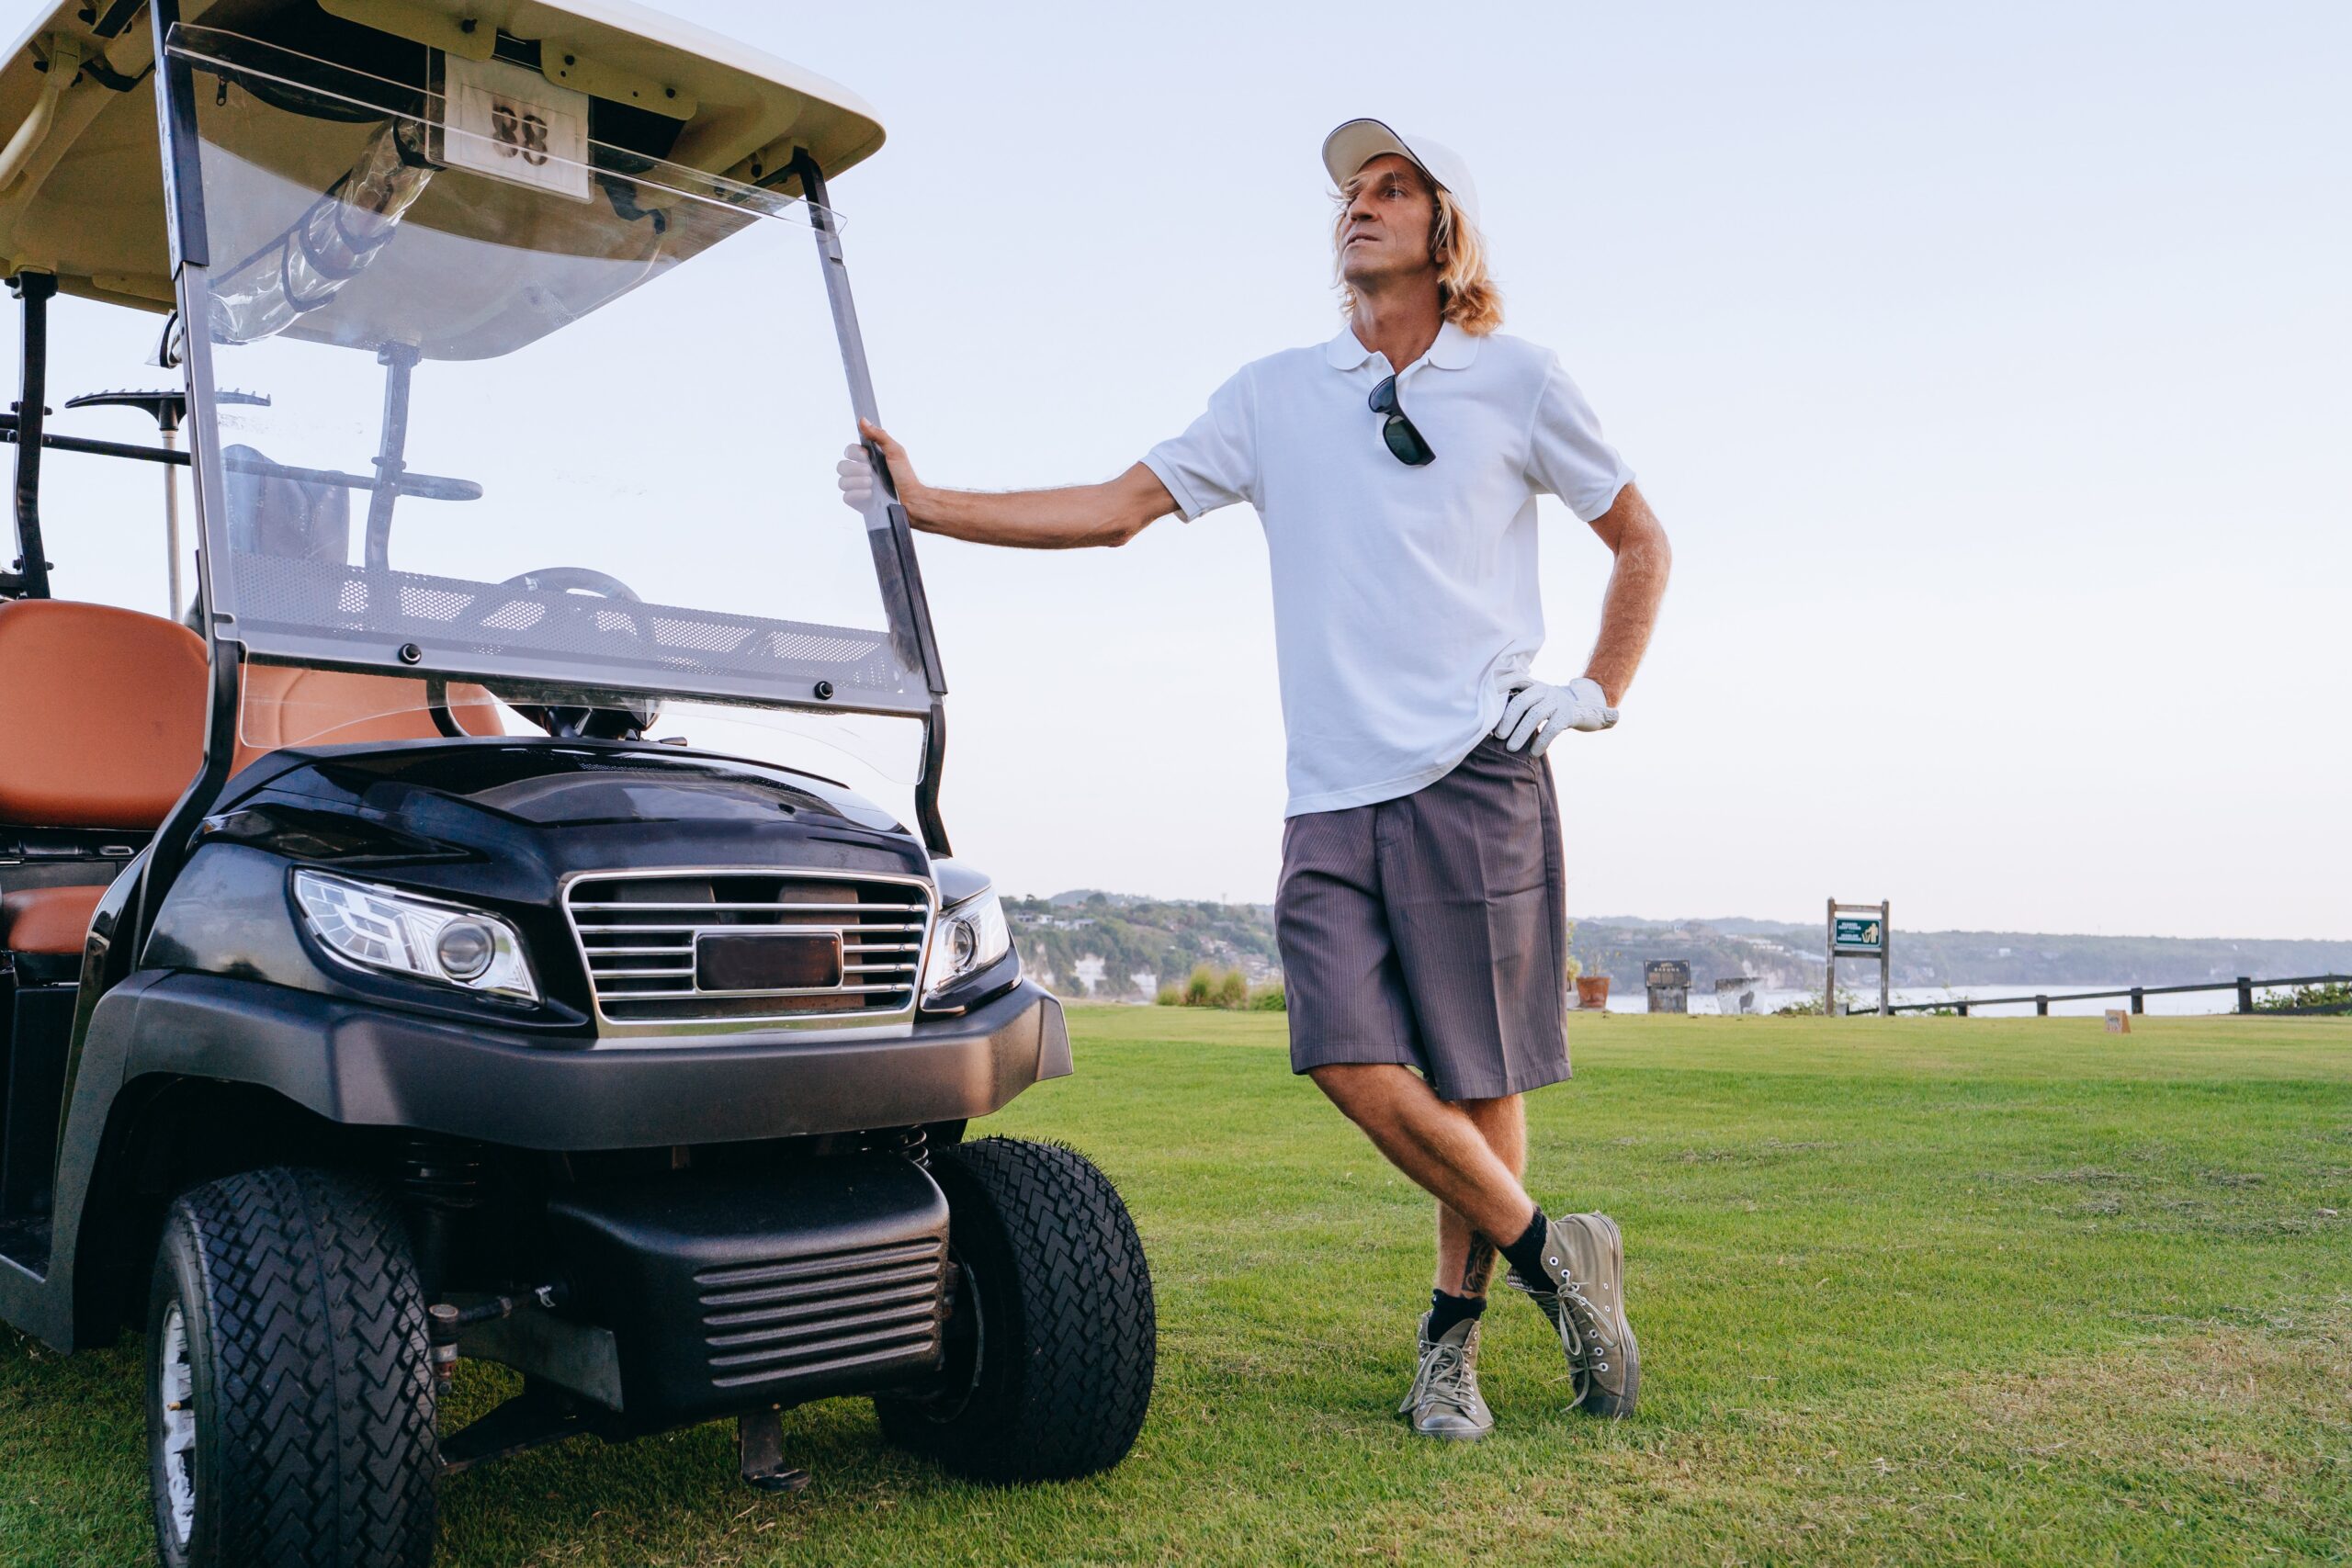 Things to Look for When Buying Used Golf Carts